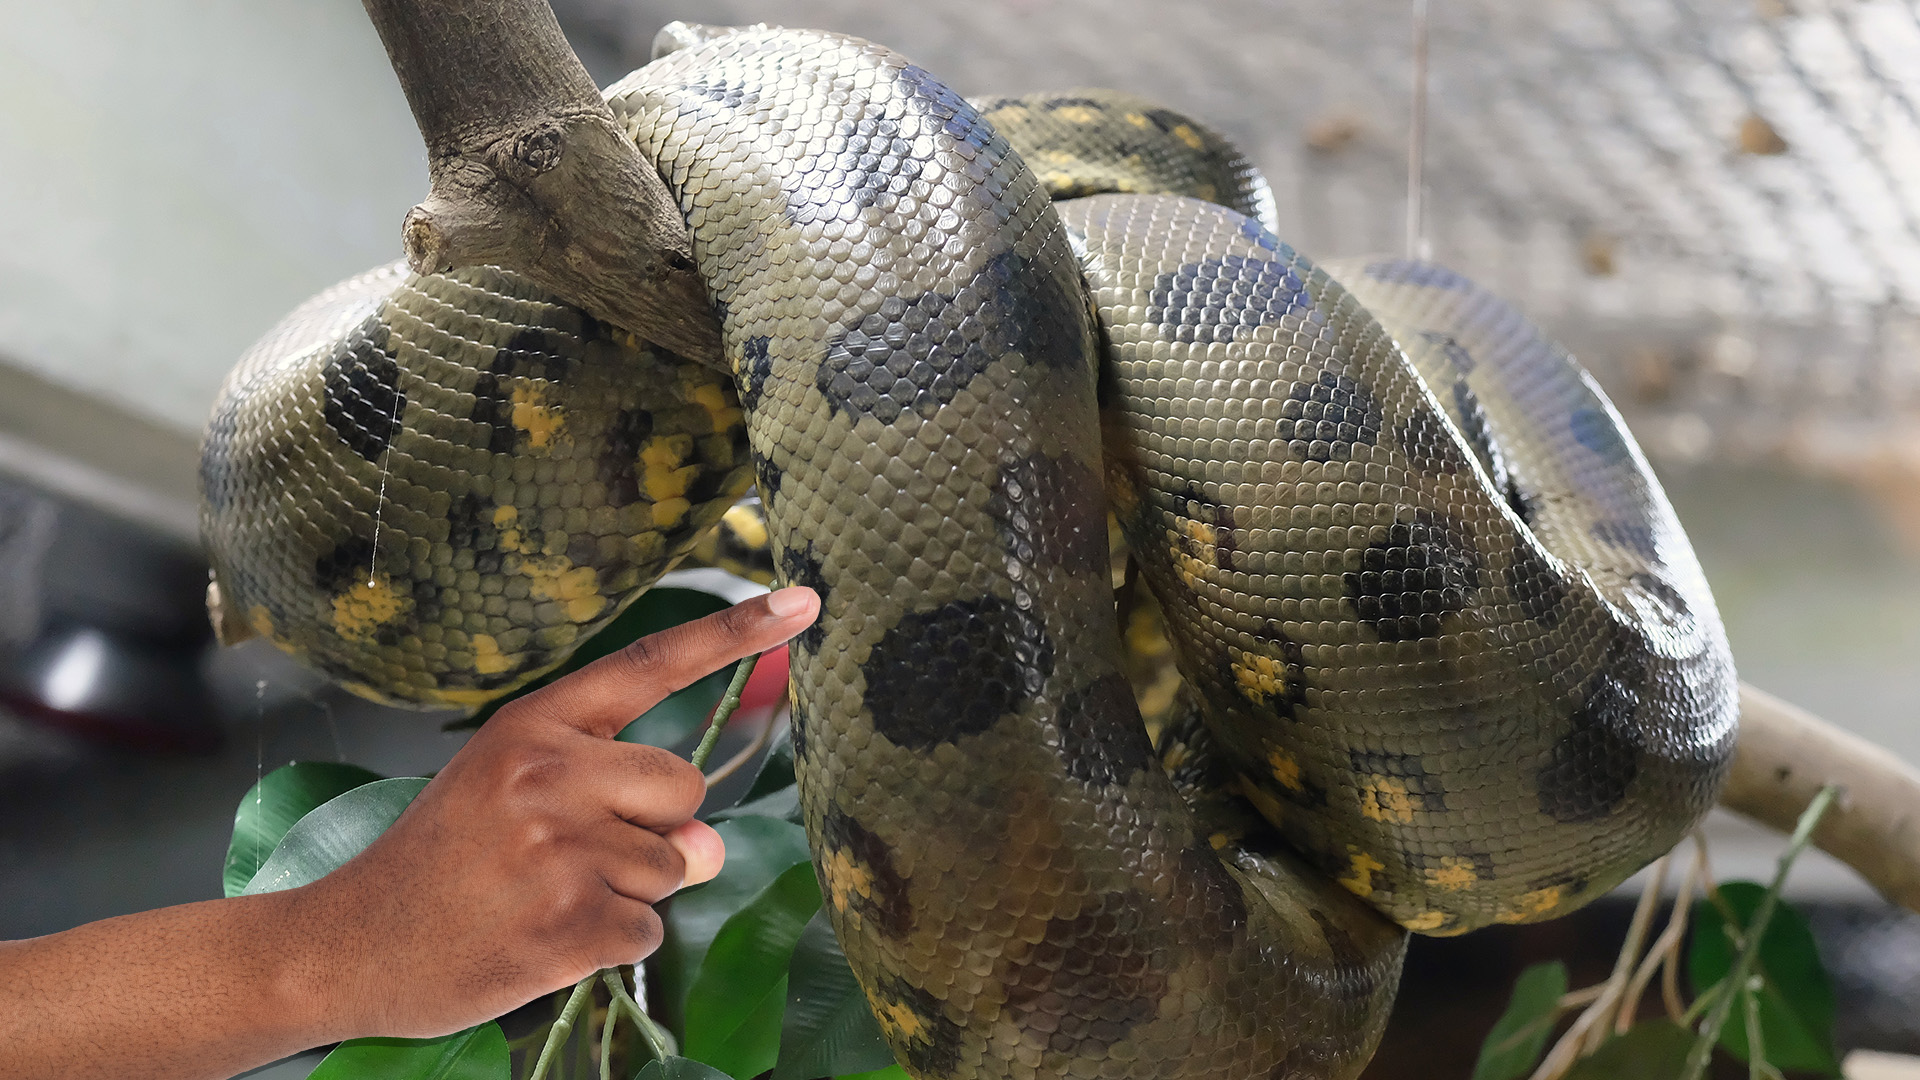 15 Interesting Facts You Never Knew About Anacondas Beano